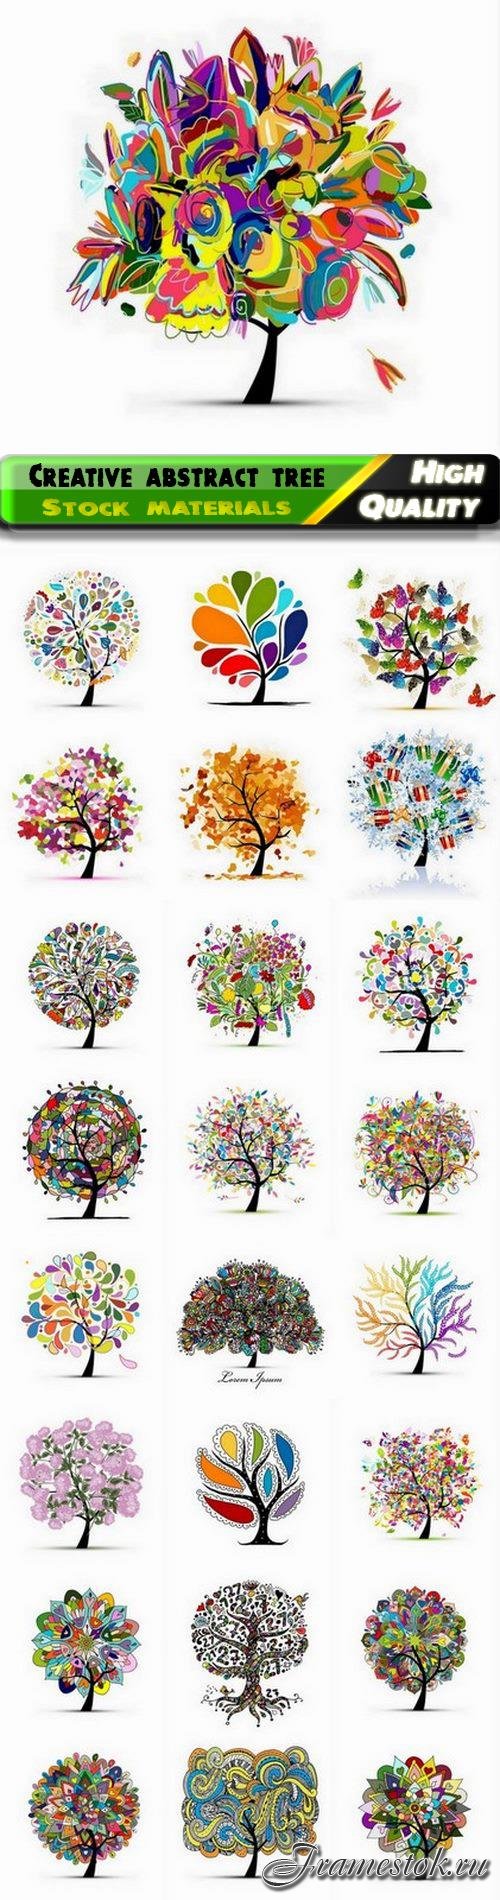 Creative tree with abstract floral leaves - 25 Eps